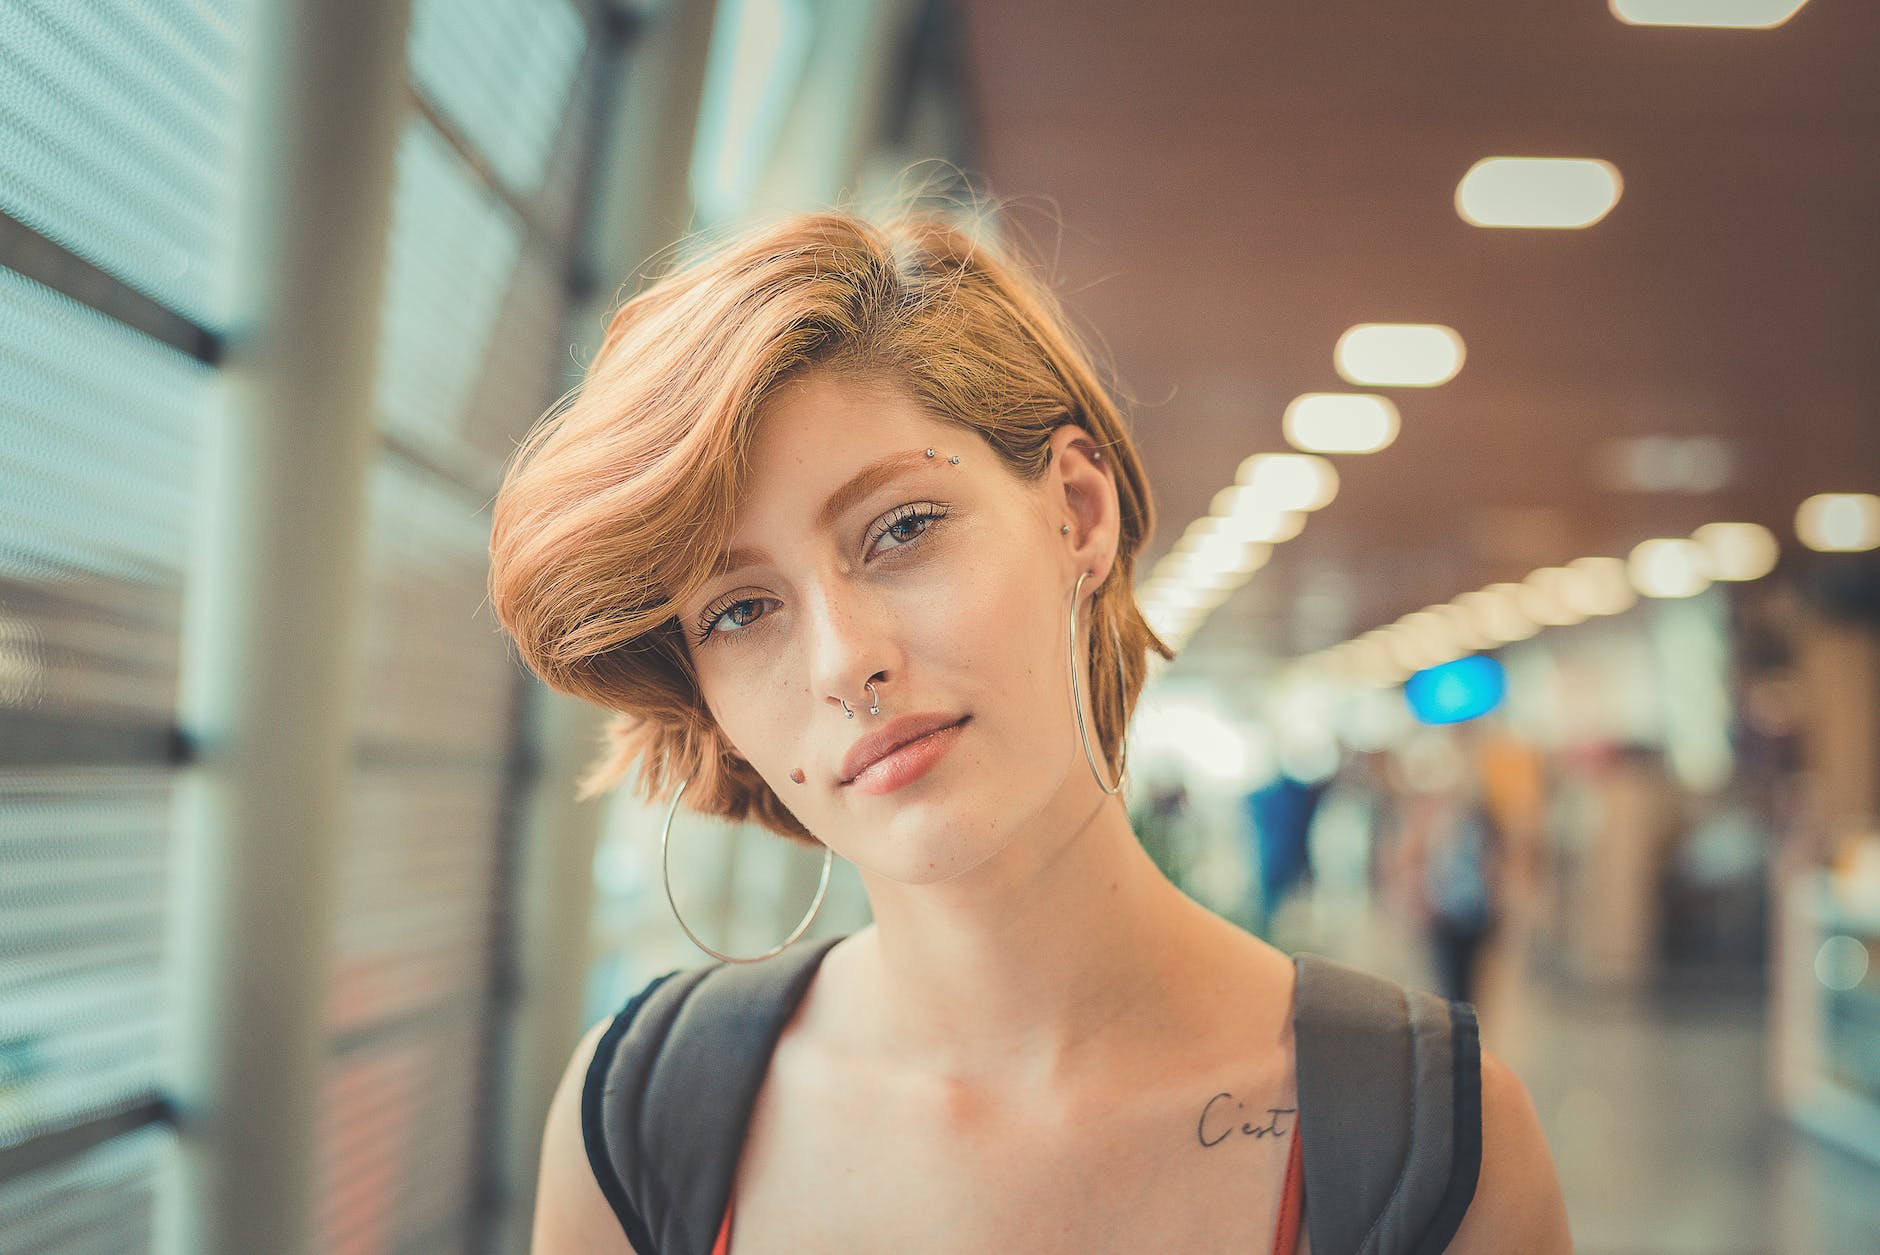 woman with short hair and piercings